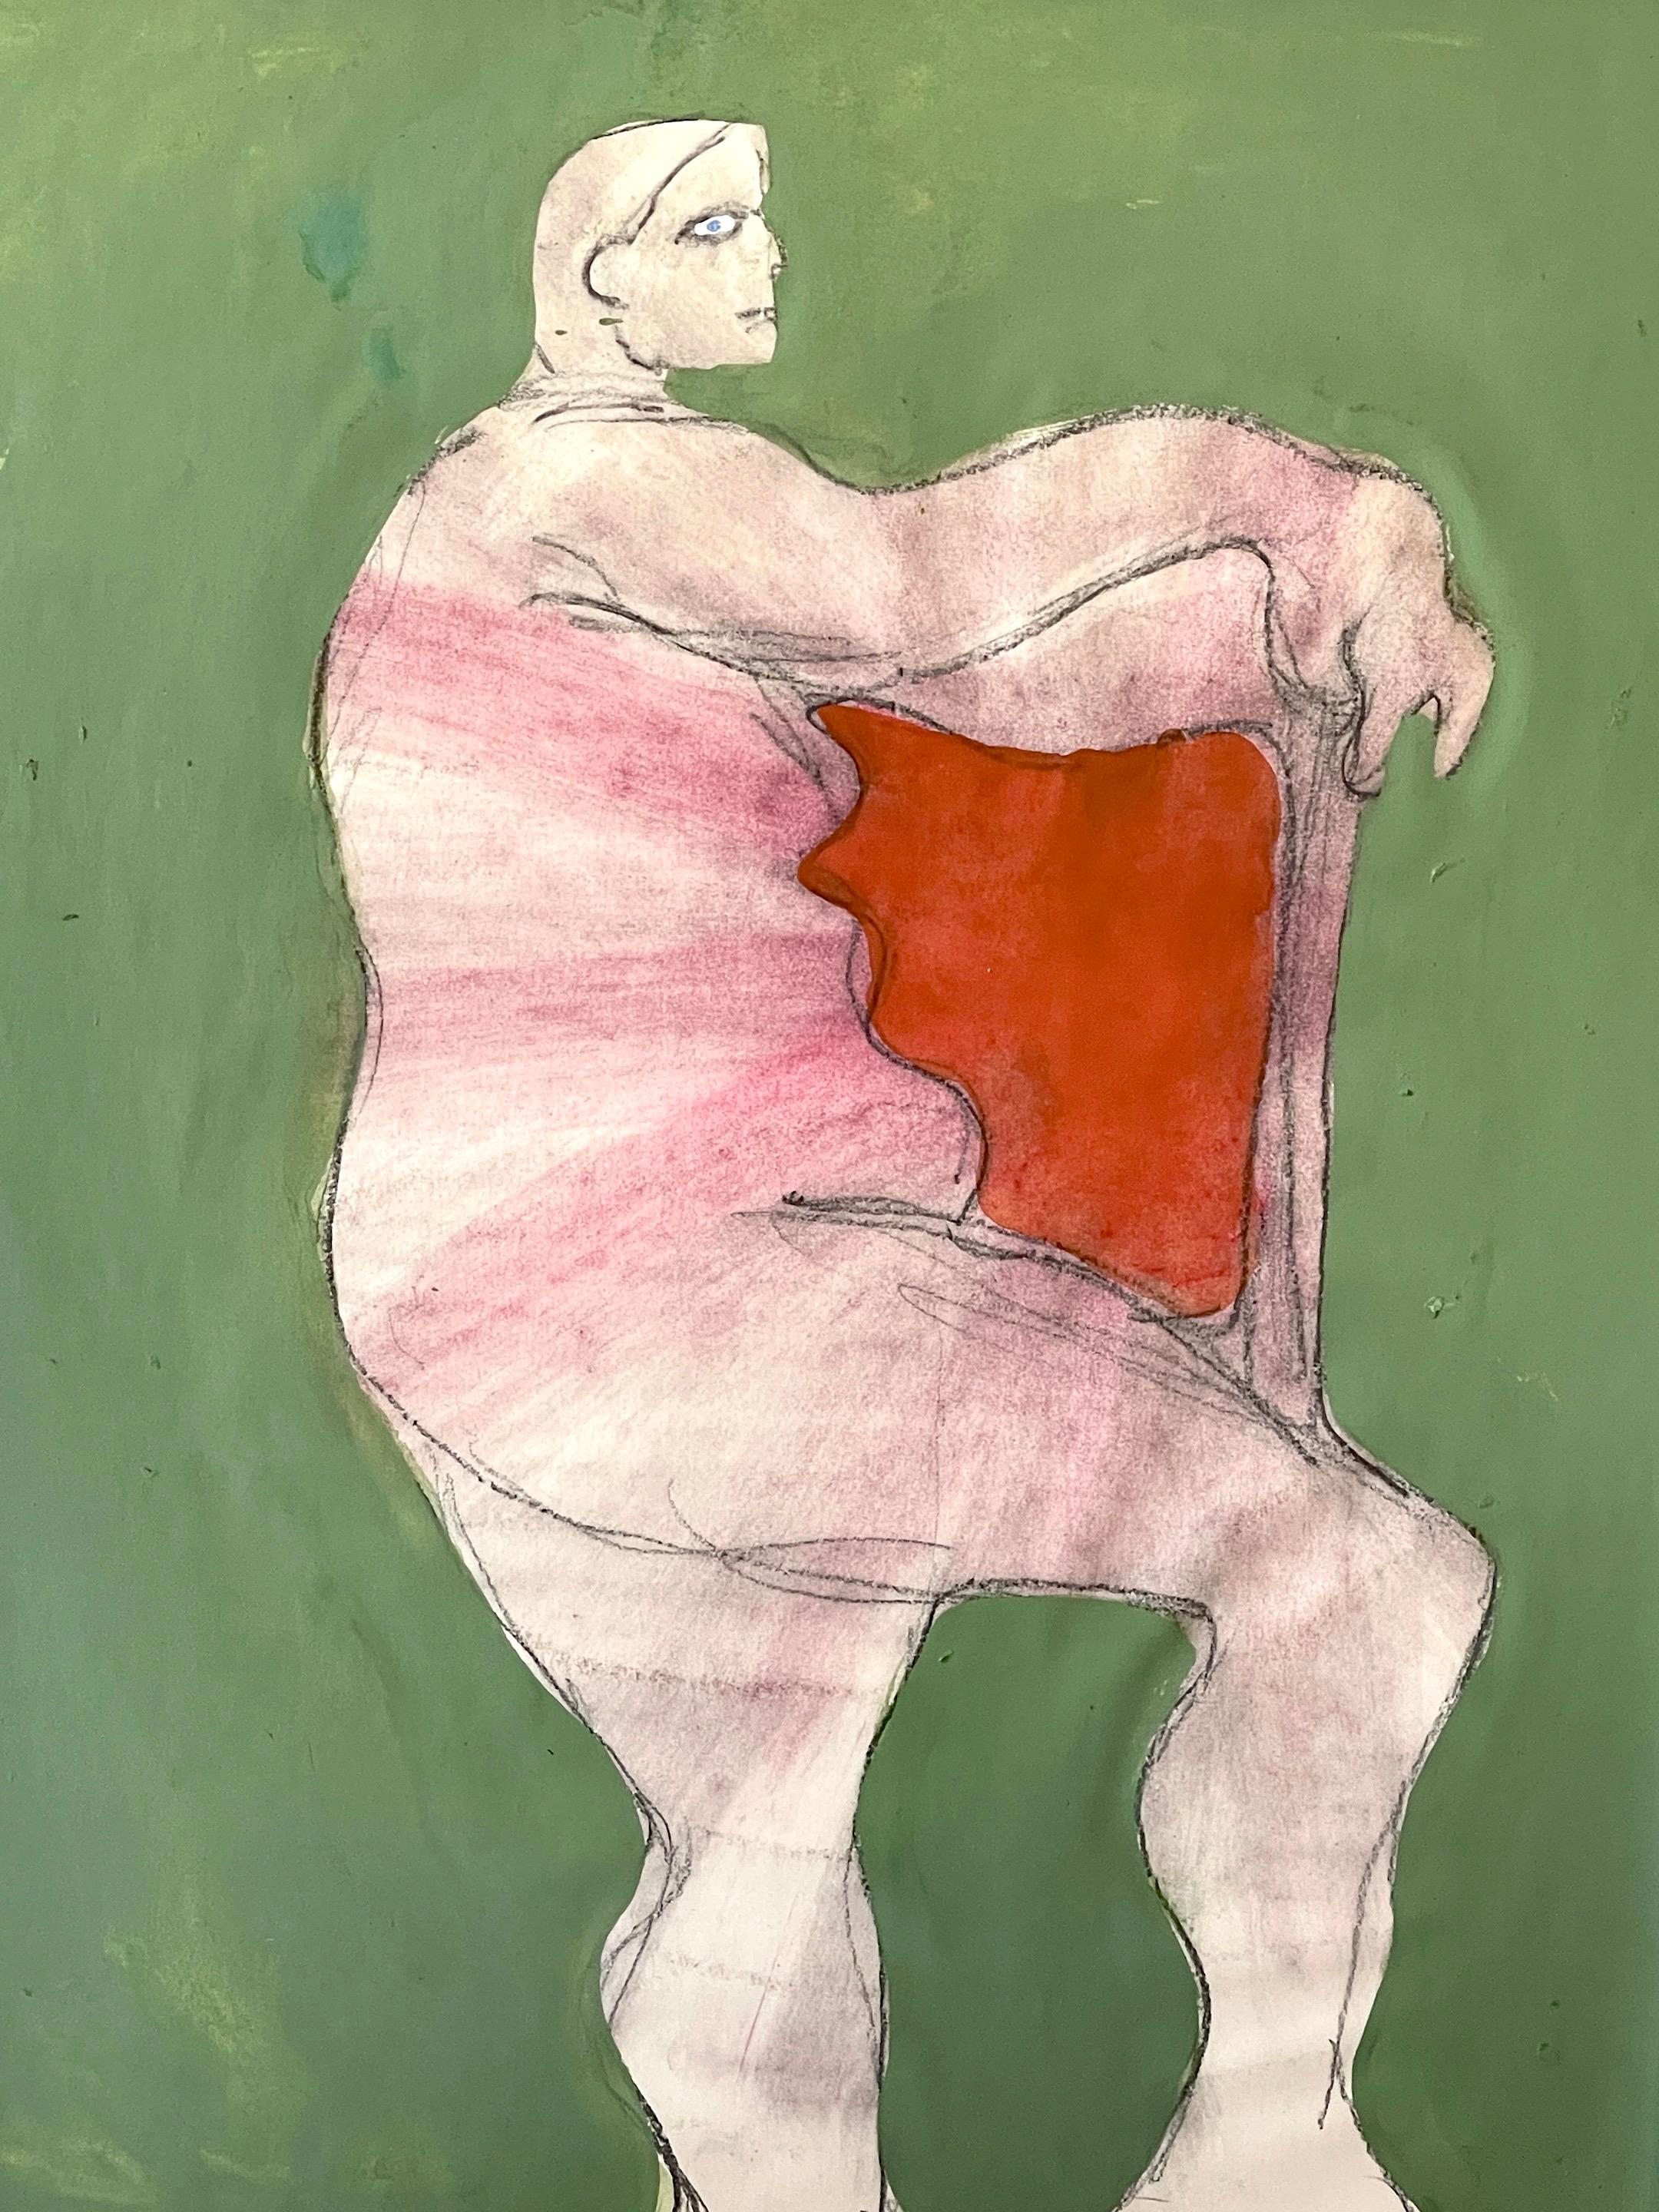 Mid-20th Century 'Standing Figure' Oil/Mixed Media on Paper, 1960s by Douglas D. Peden For Sale